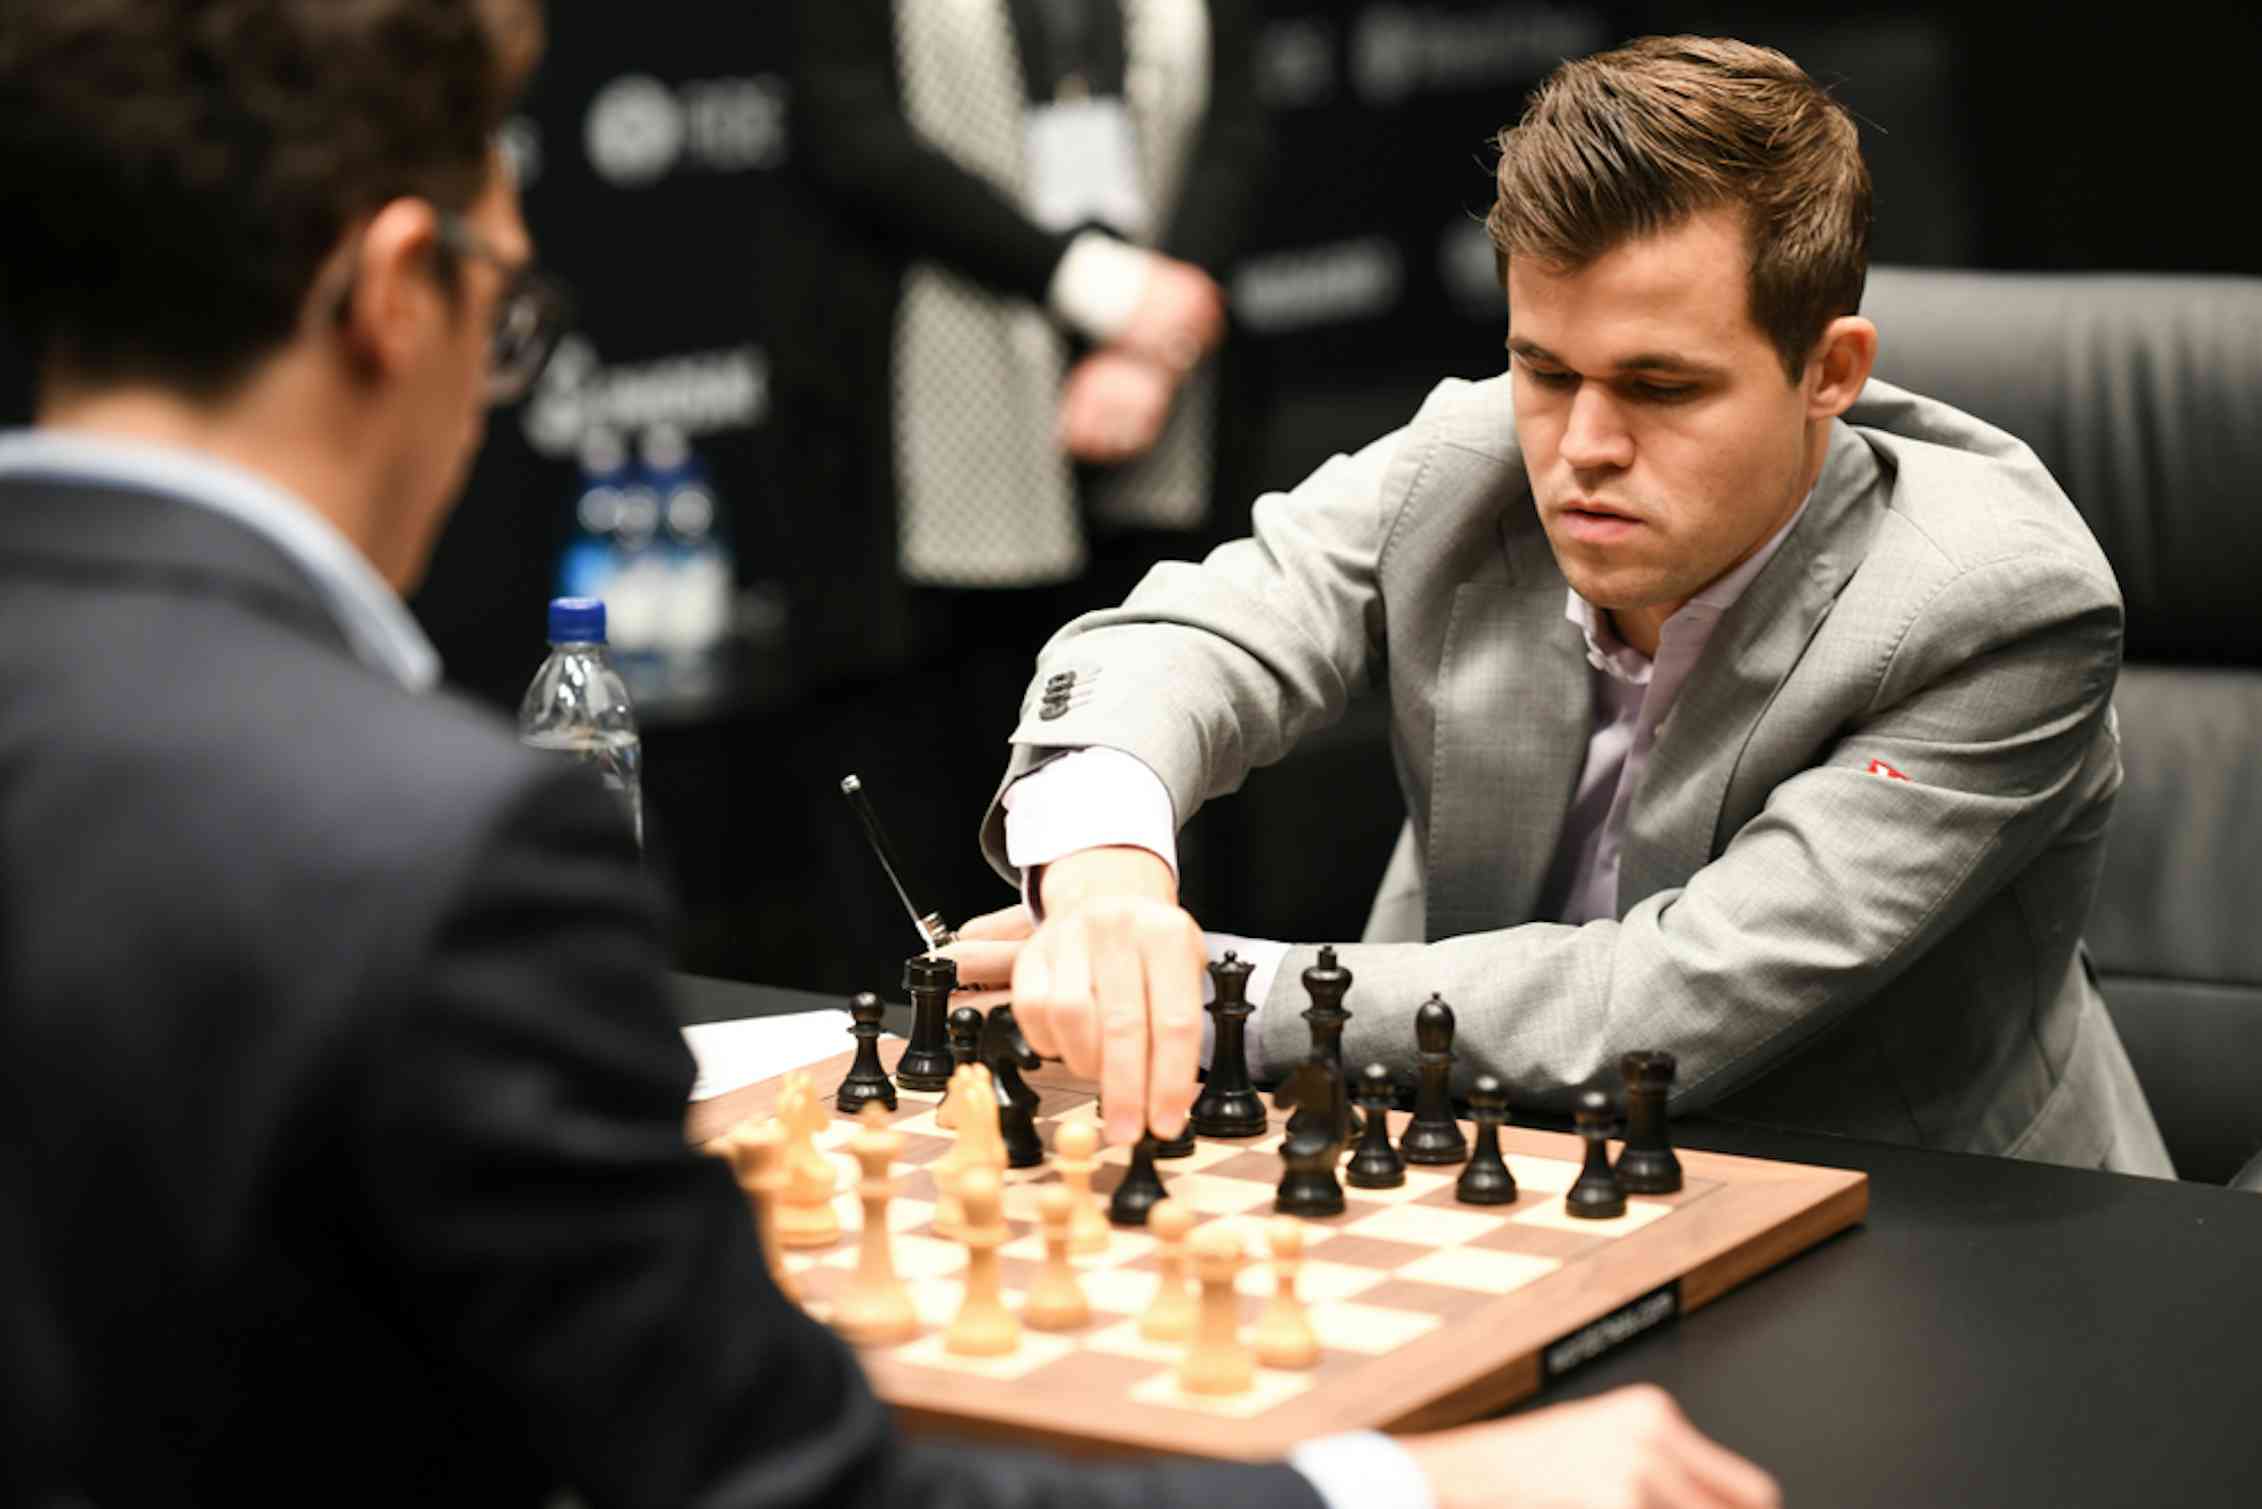 A man wearing a grey suit moves a piece on a chess board.